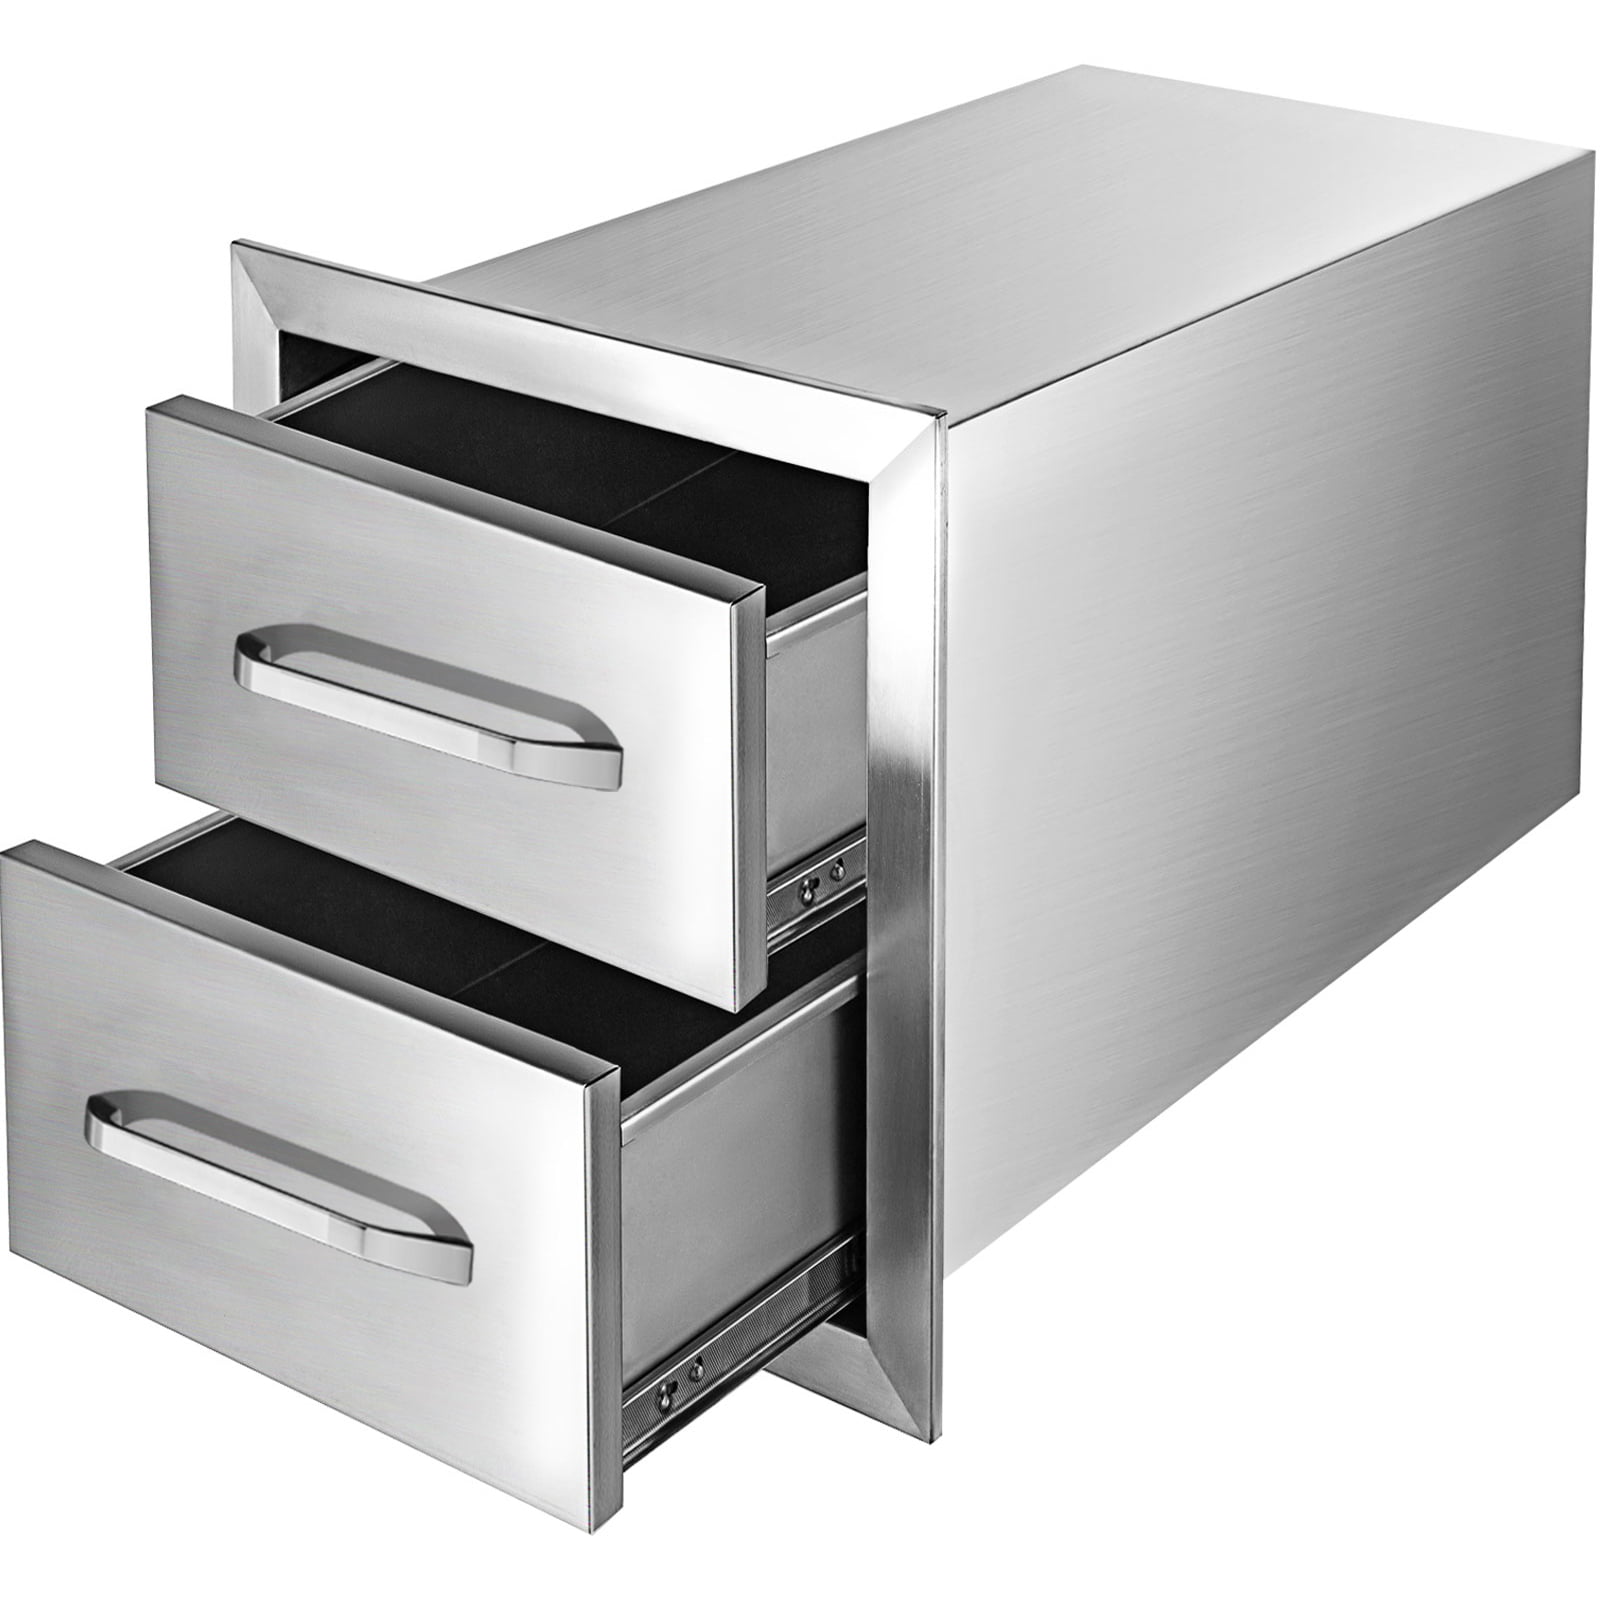 yuxiangBBQ Outdoor Kitchen Drawers Stainless Steel,14 W x 8 H Single Drawer,Flush Mount for Outdoor Kitchen or BBQ Island